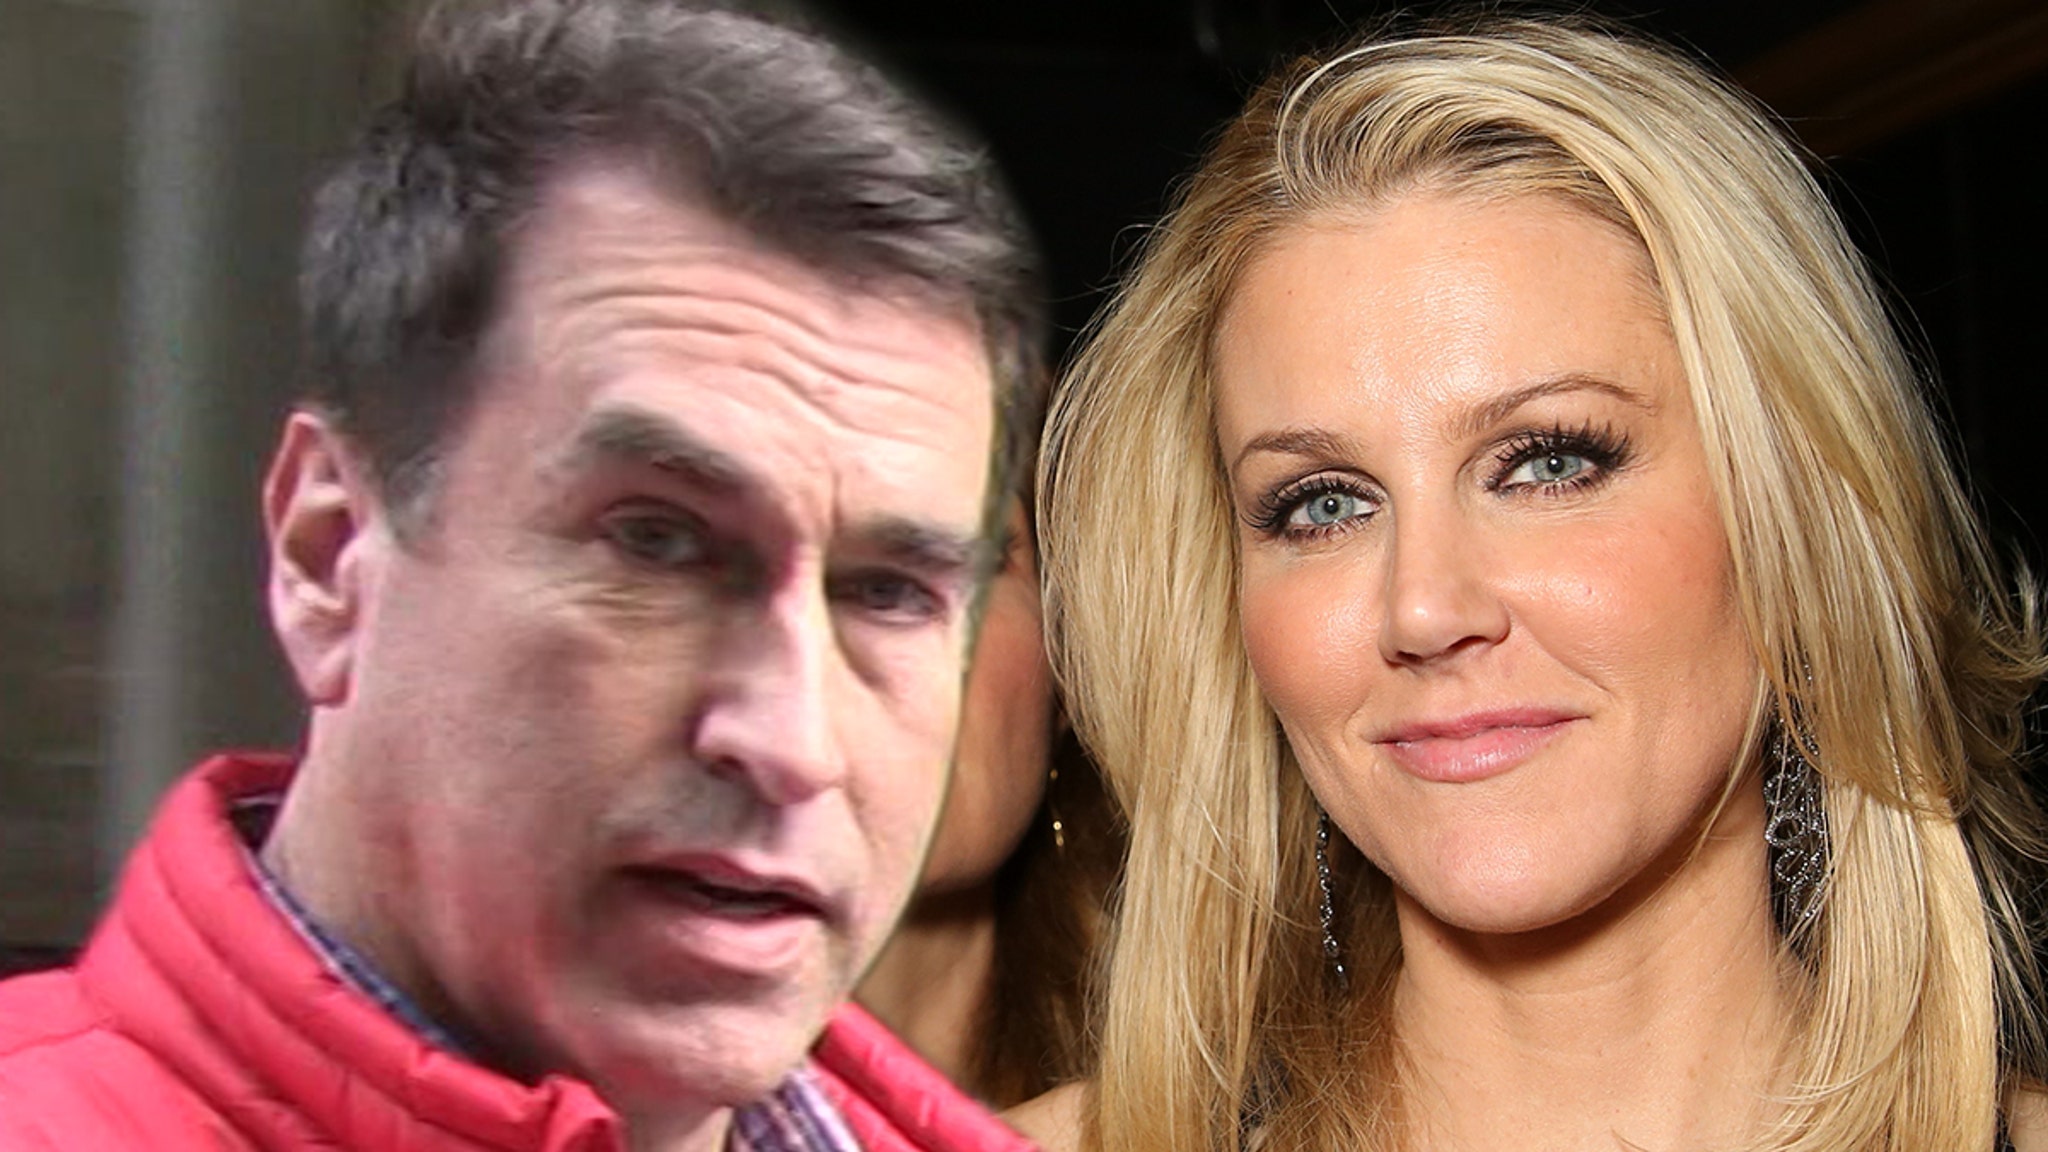 Rob Riggle Claims Estranged Wife Spied on Him at Home with Hidden Camera - TMZ